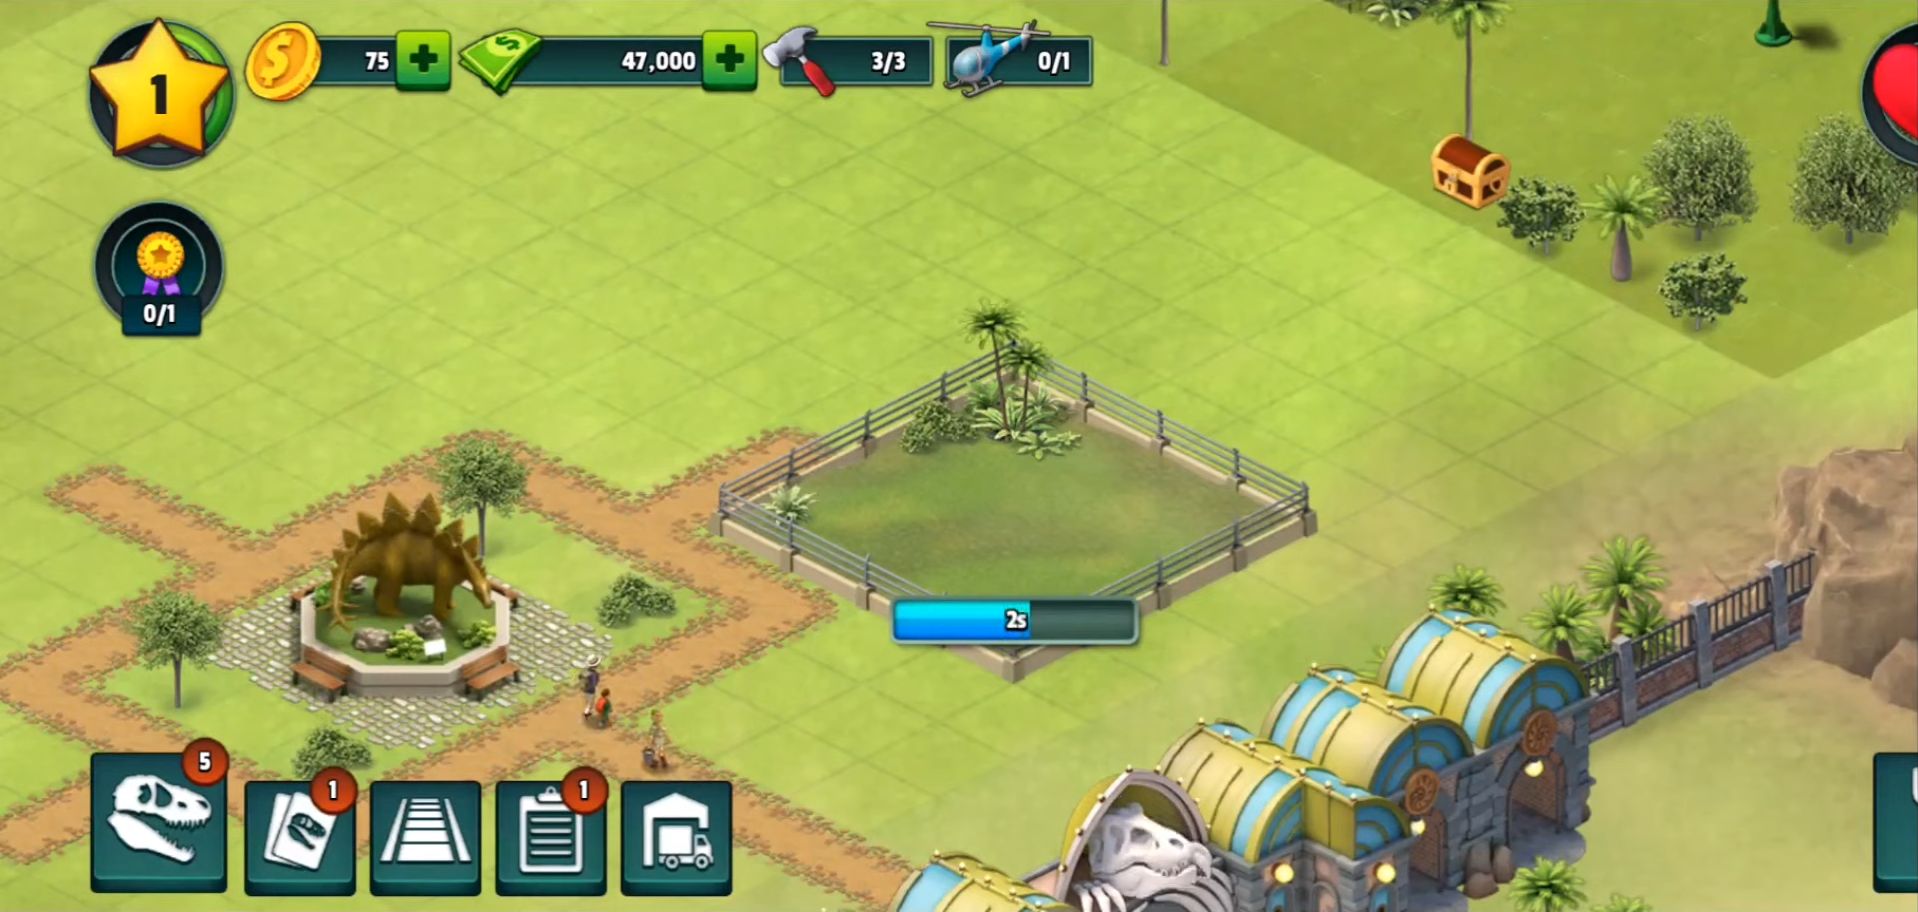 Download Jurassic Dinosaur: Park Game Android free game.